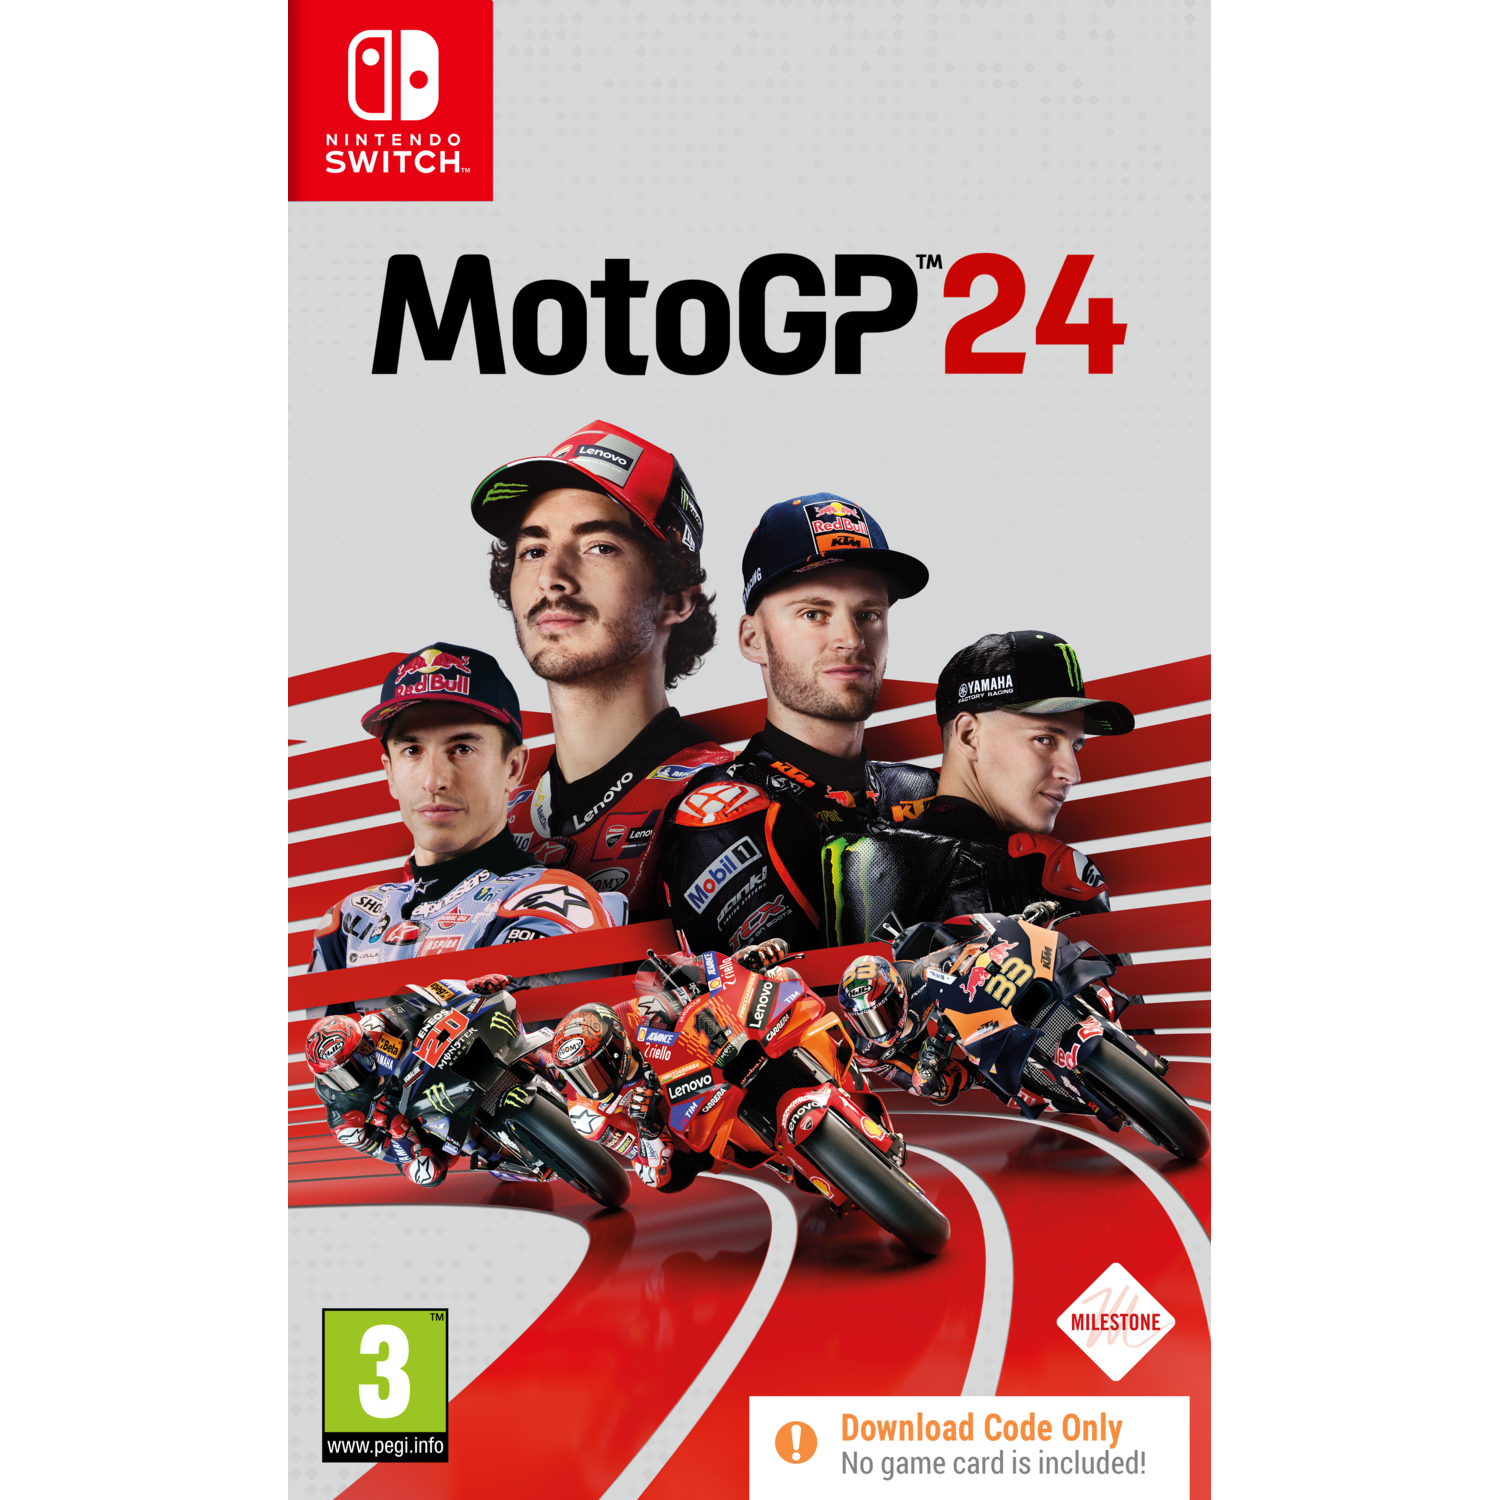 MotoGP 24 - Day One Edition - Nintendo Switch - Code in a box